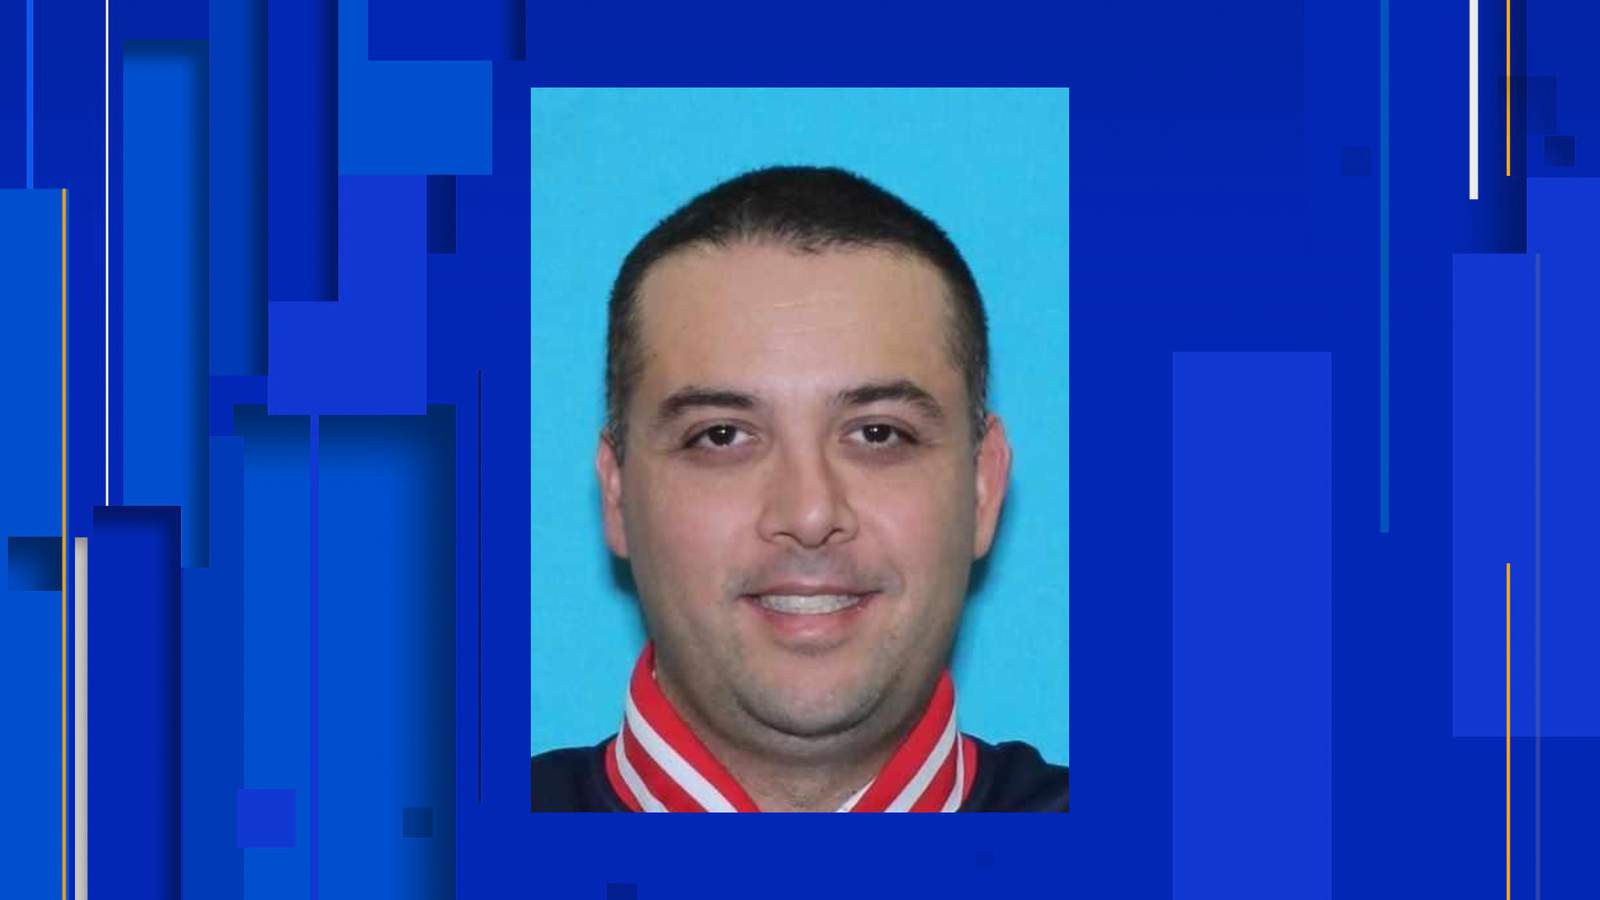 San Antonio police searching for missing 31-year-old man